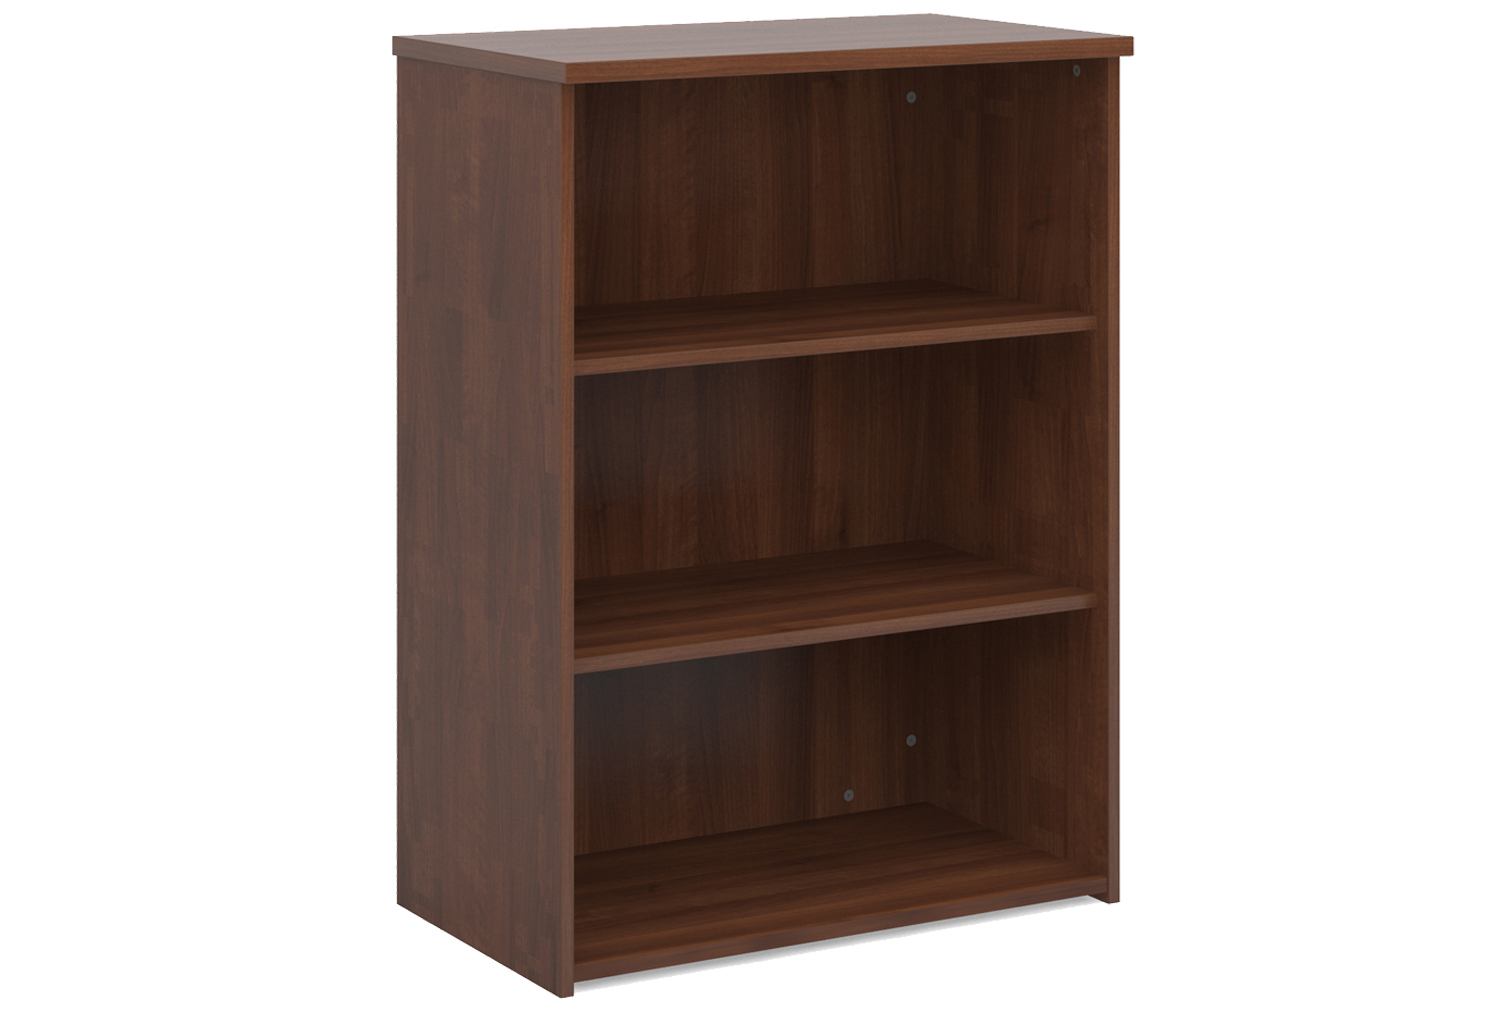 All Walnut Office Bookcases, 2 Shelf - 80wx47dx109h (cm), Express Delivery